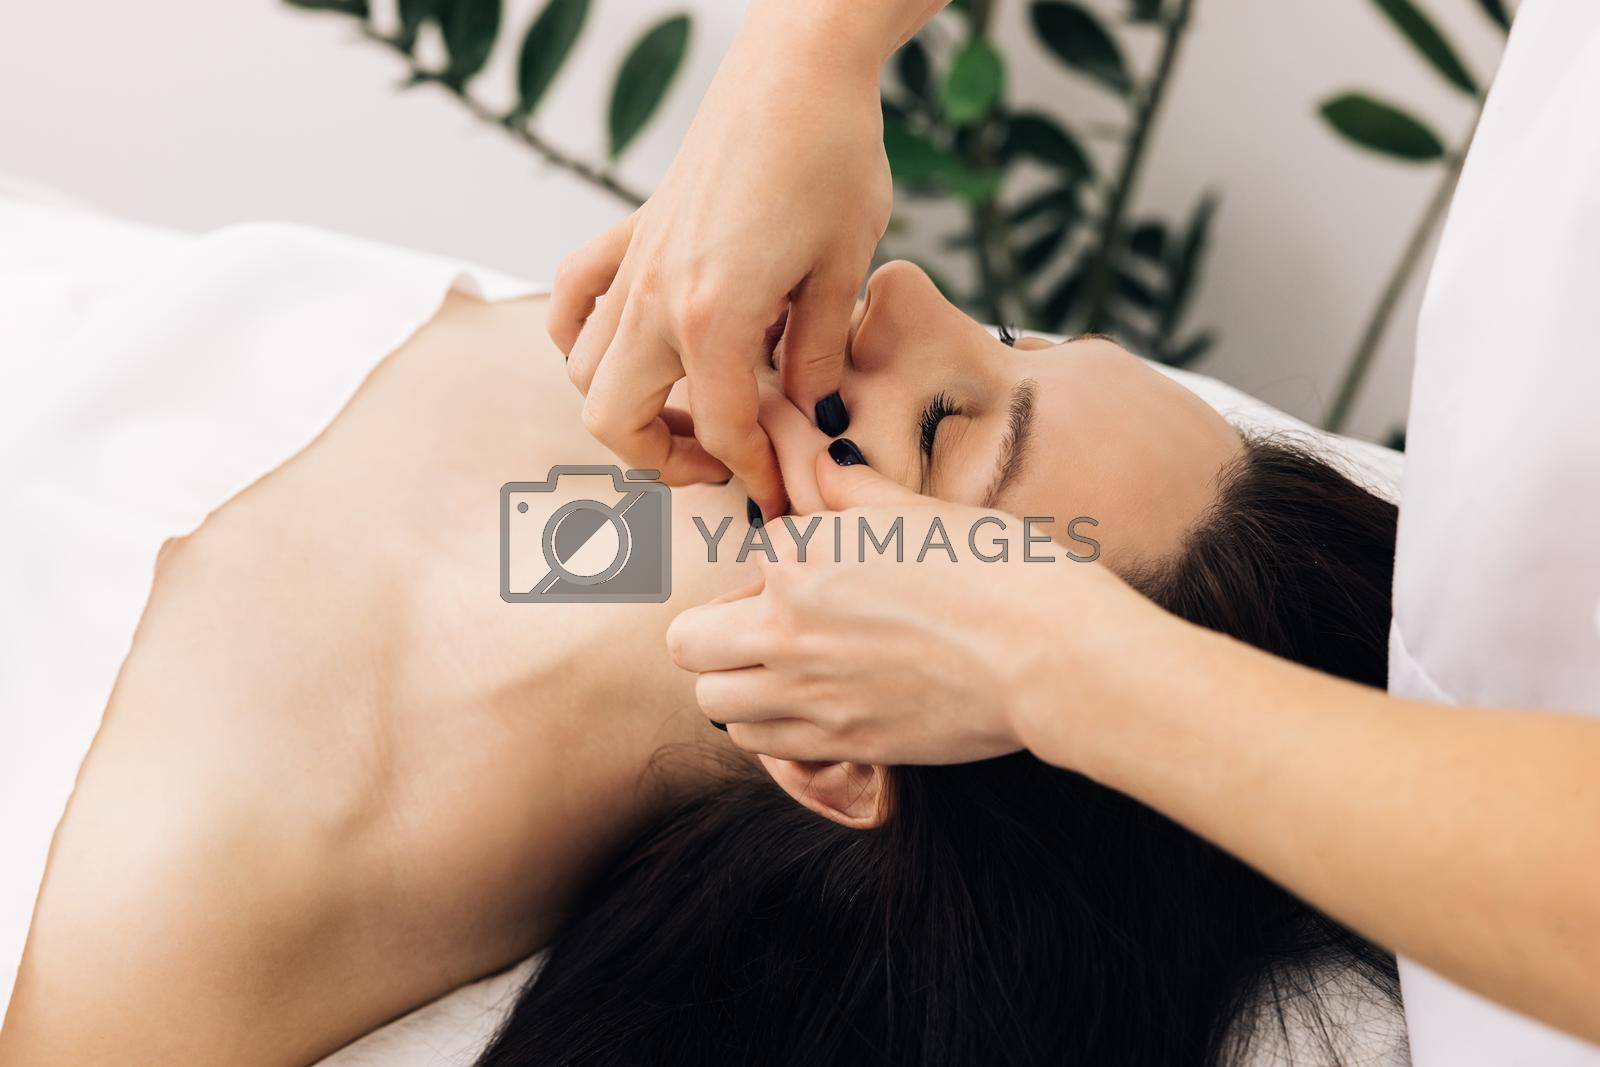 Face Massage in beauty spa salon. Female enjoying relaxing face massage in cosmetology spa centre. Body care, skin care, wellness, beauty treatment. Spa woman facial Massage.